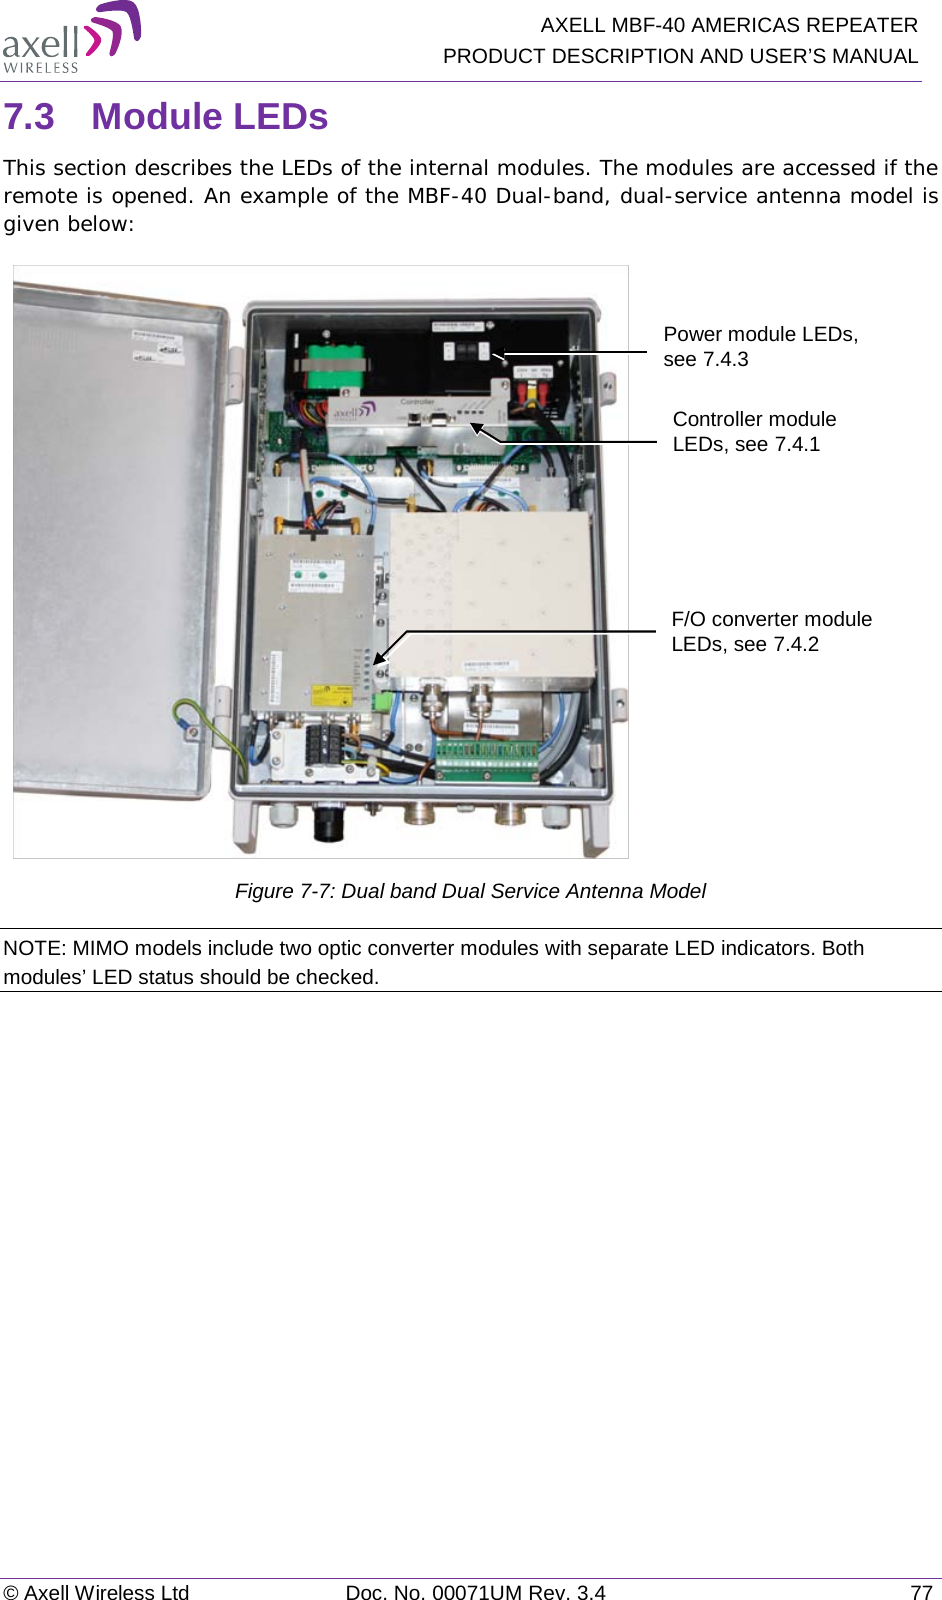   AXELL MBF-40 AMERICAS REPEATER PRODUCT DESCRIPTION AND USER’S MANUAL © Axell Wireless Ltd Doc. No. 00071UM Rev. 3.4 77 7.3  Module LEDs This section describes the LEDs of the internal modules. The modules are accessed if the remote is opened. An example of the MBF-40 Dual-band, dual-service antenna model is given below:    Figure  7-7: Dual band Dual Service Antenna Model NOTE: MIMO models include two optic converter modules with separate LED indicators. Both modules’ LED status should be checked.   F/O converter module LEDs, see  7.4.2 Controller module LEDs, see  7.4.1 Power module LEDs, see   7.4.3 